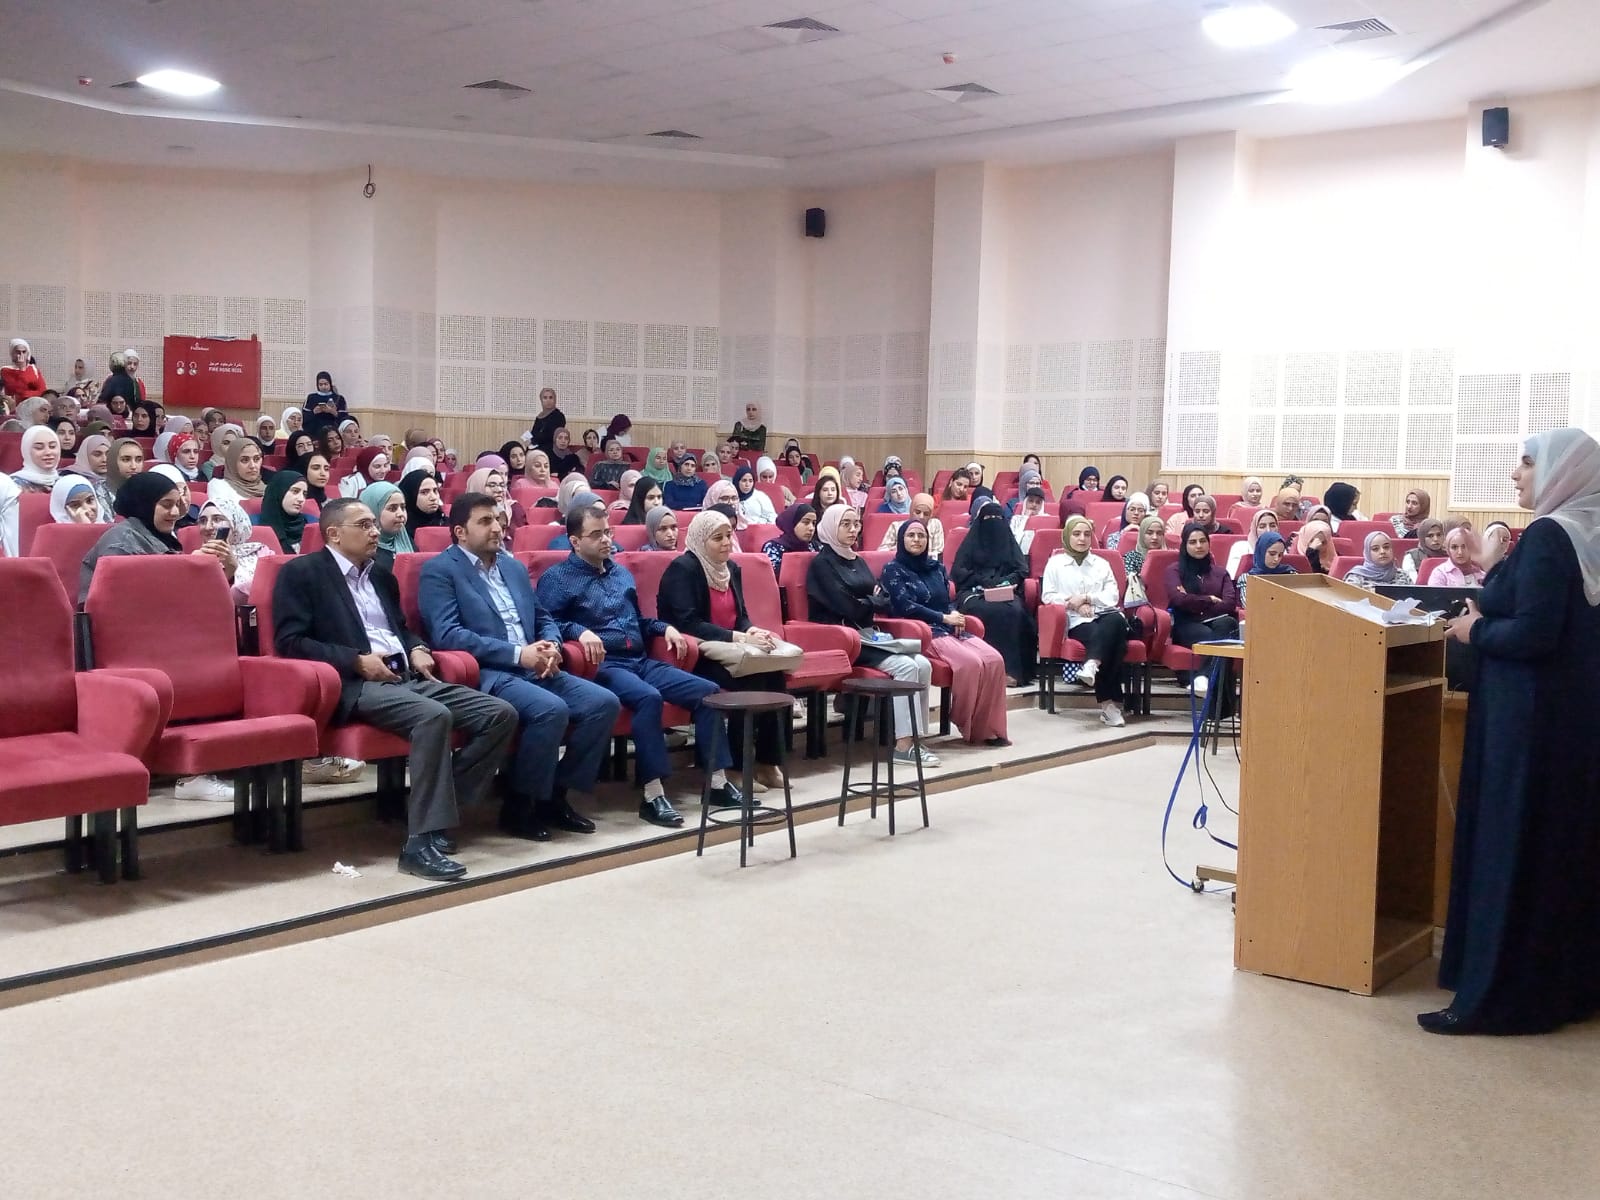 Interactive lectures in pharmacology at the Faculty of Pharmacy